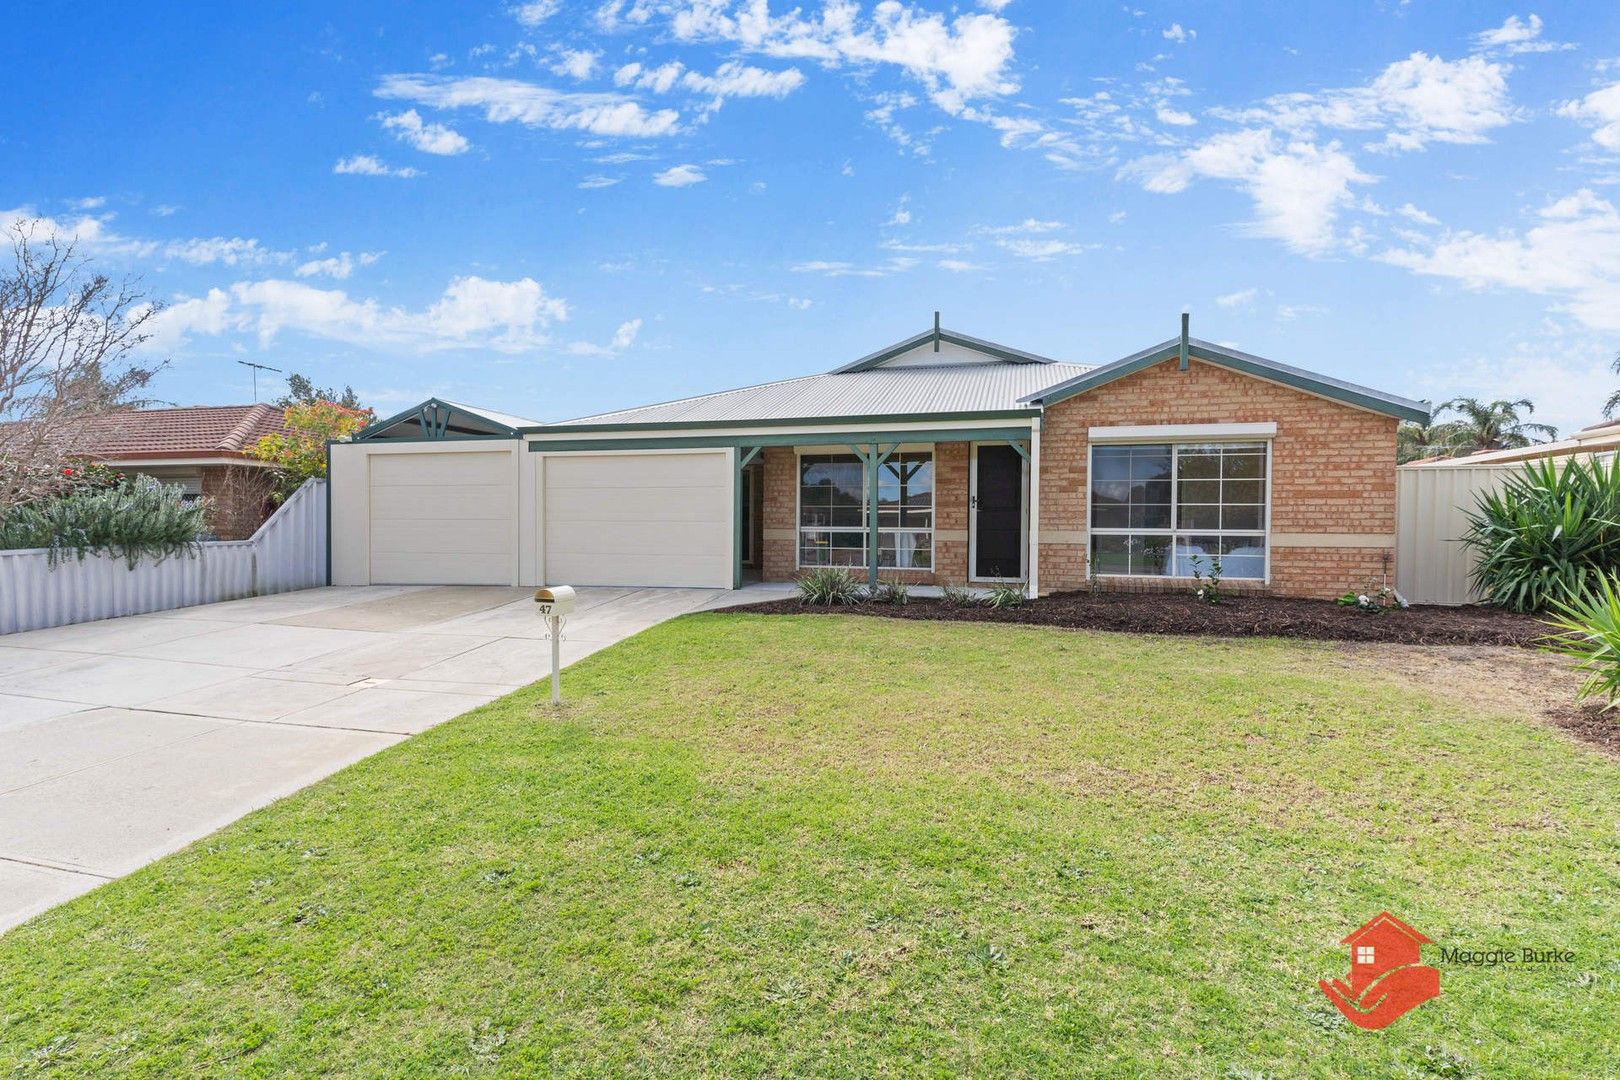 4 bedrooms House in 47 Chisholm Circle SEVILLE GROVE WA, 6112